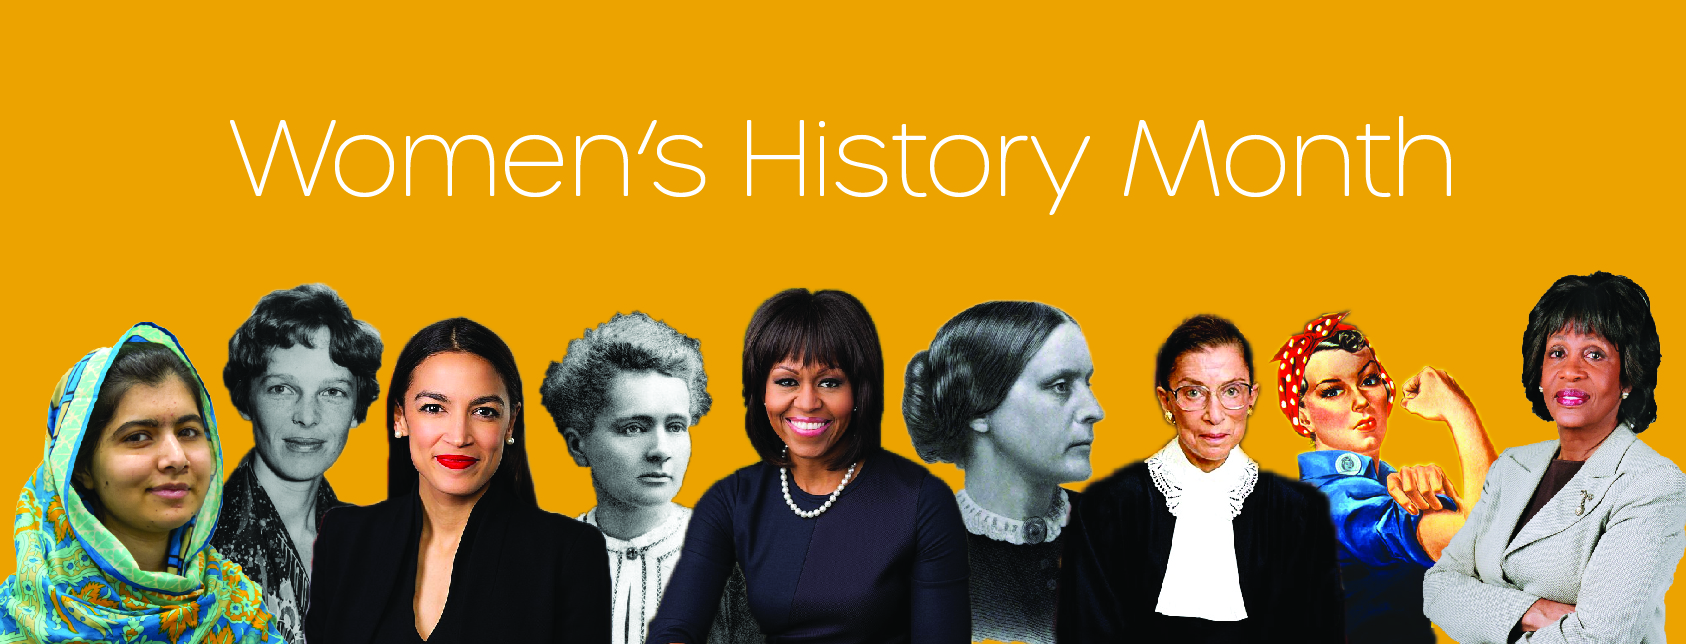 Women's History Month at ϲҳ